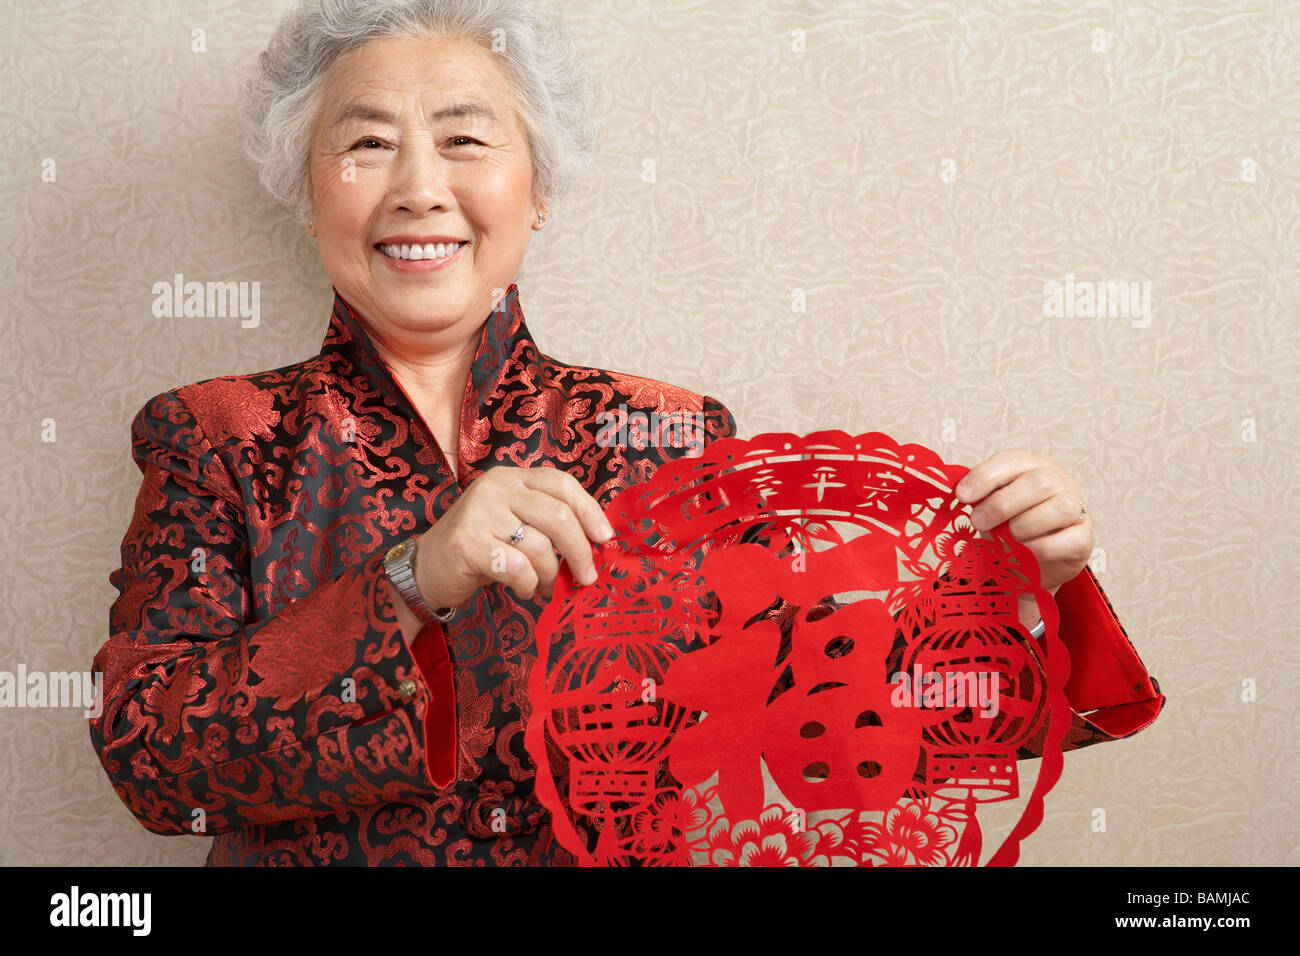 Women Holding Paper Cutting Which Symbolizes Luck Stock Photo